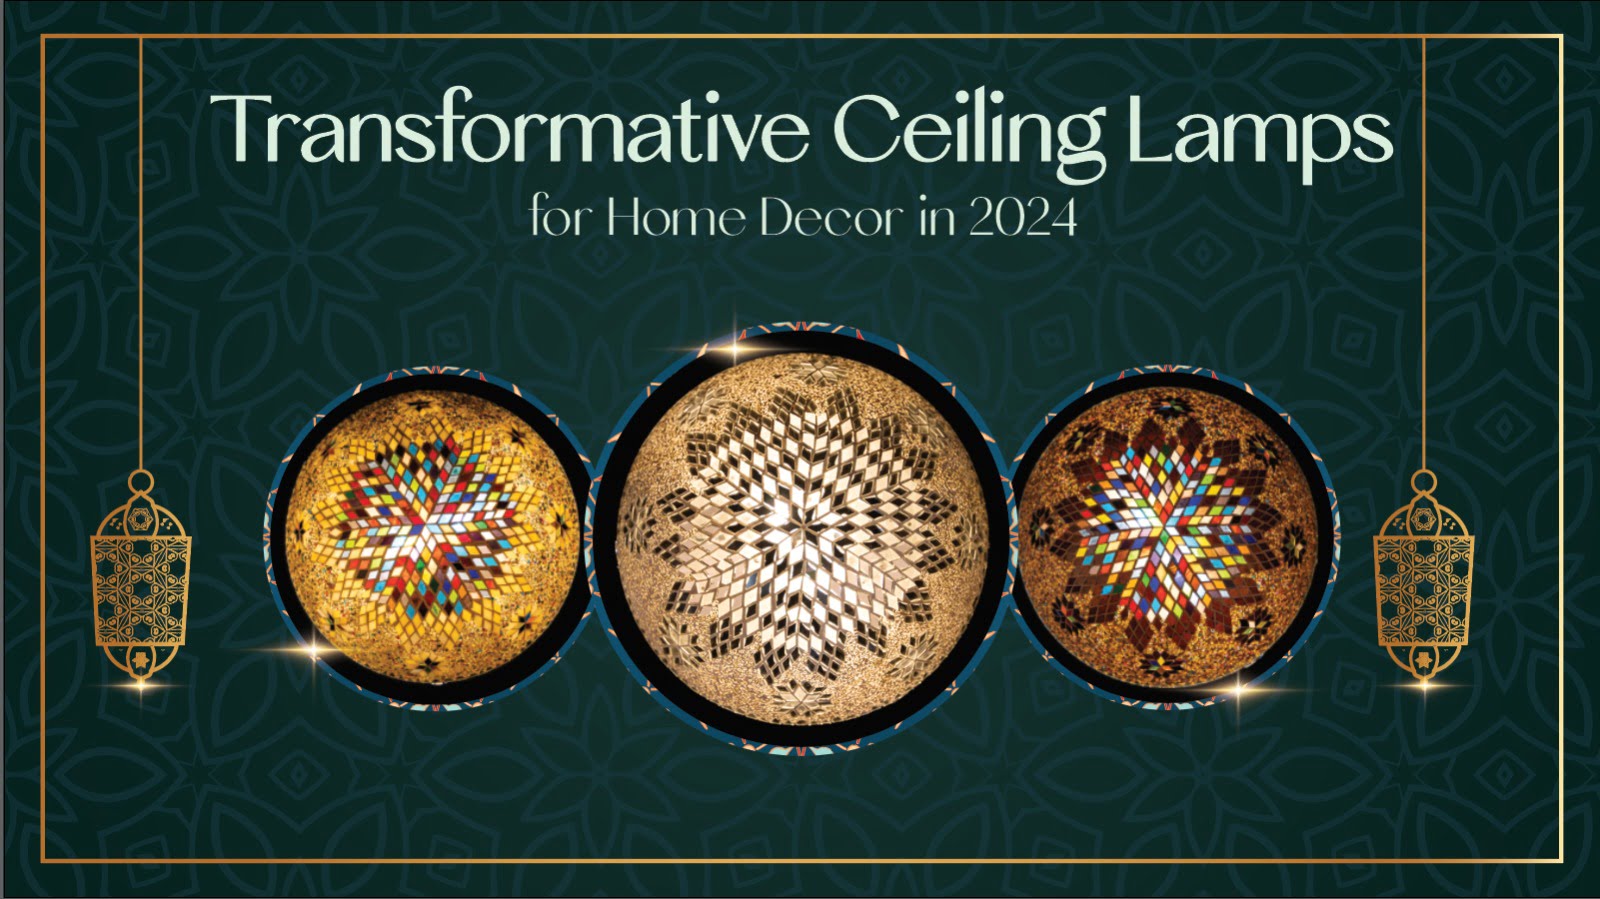 Transformative Ceiling Lamps for Home Decor in 2024